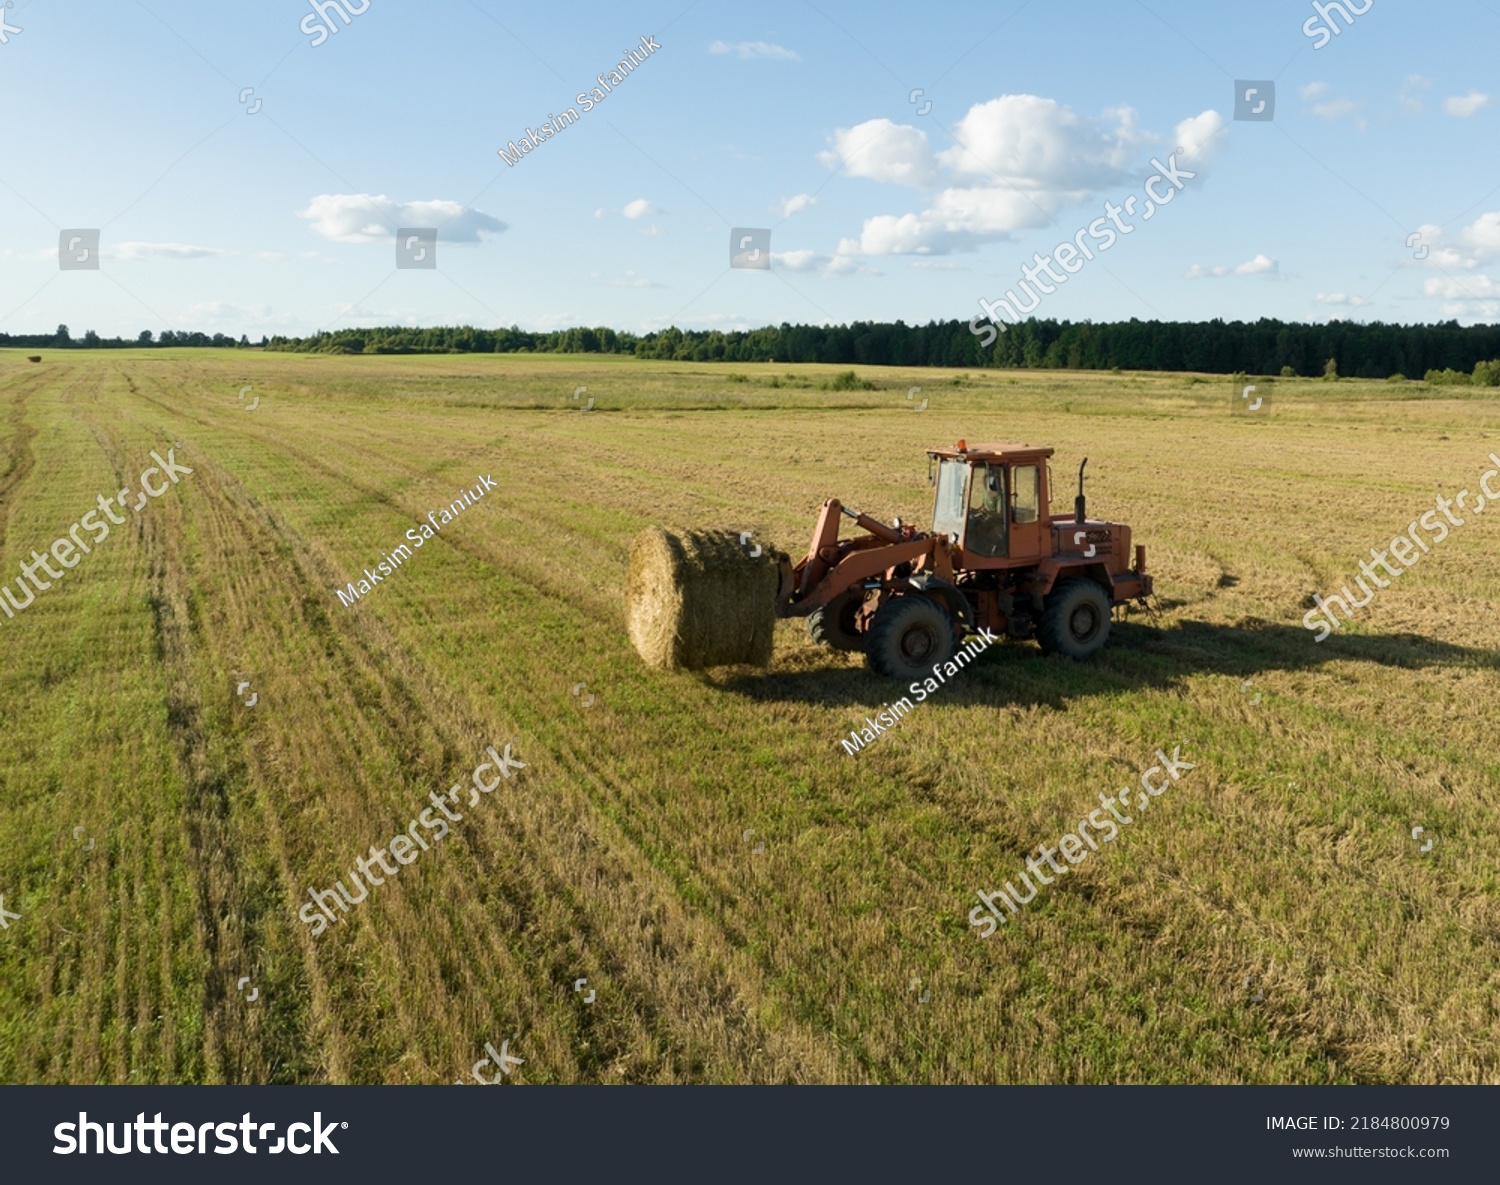 Hay Making in autumn season. Farmer loading round bales of straw from Hay Trailer with a front end loader. Store hay at farm. Hay rolls as Forage feed for livestock. #2184800979